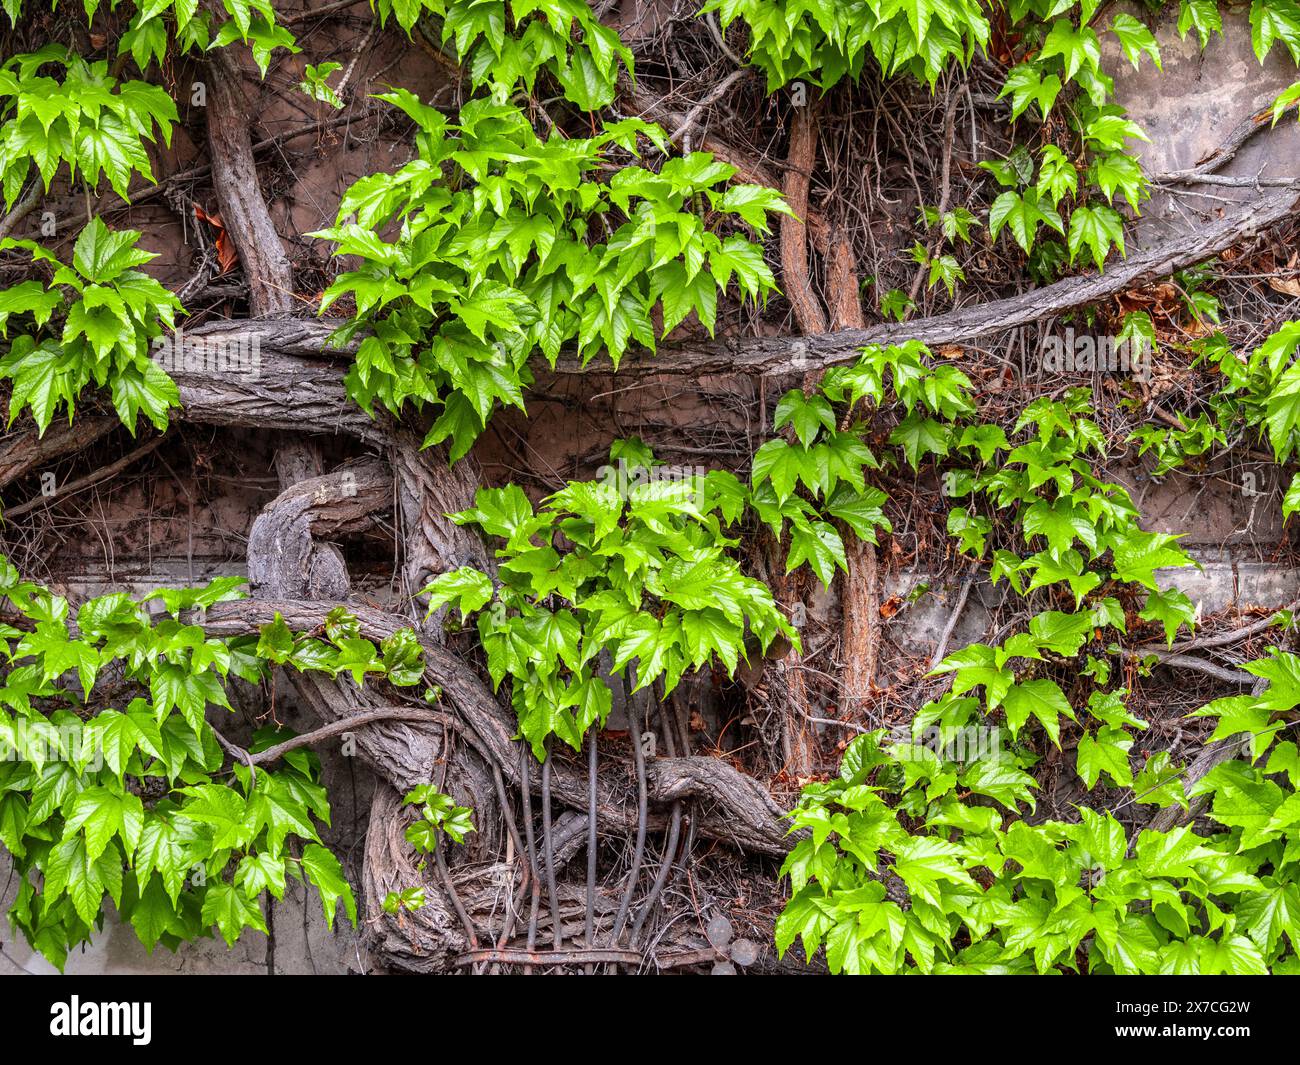 Tangled branches and green leaves of a wild vine. Decorative plant motif. Shades of brown, gray and contrasting, vivid green leaves. Stock Photo